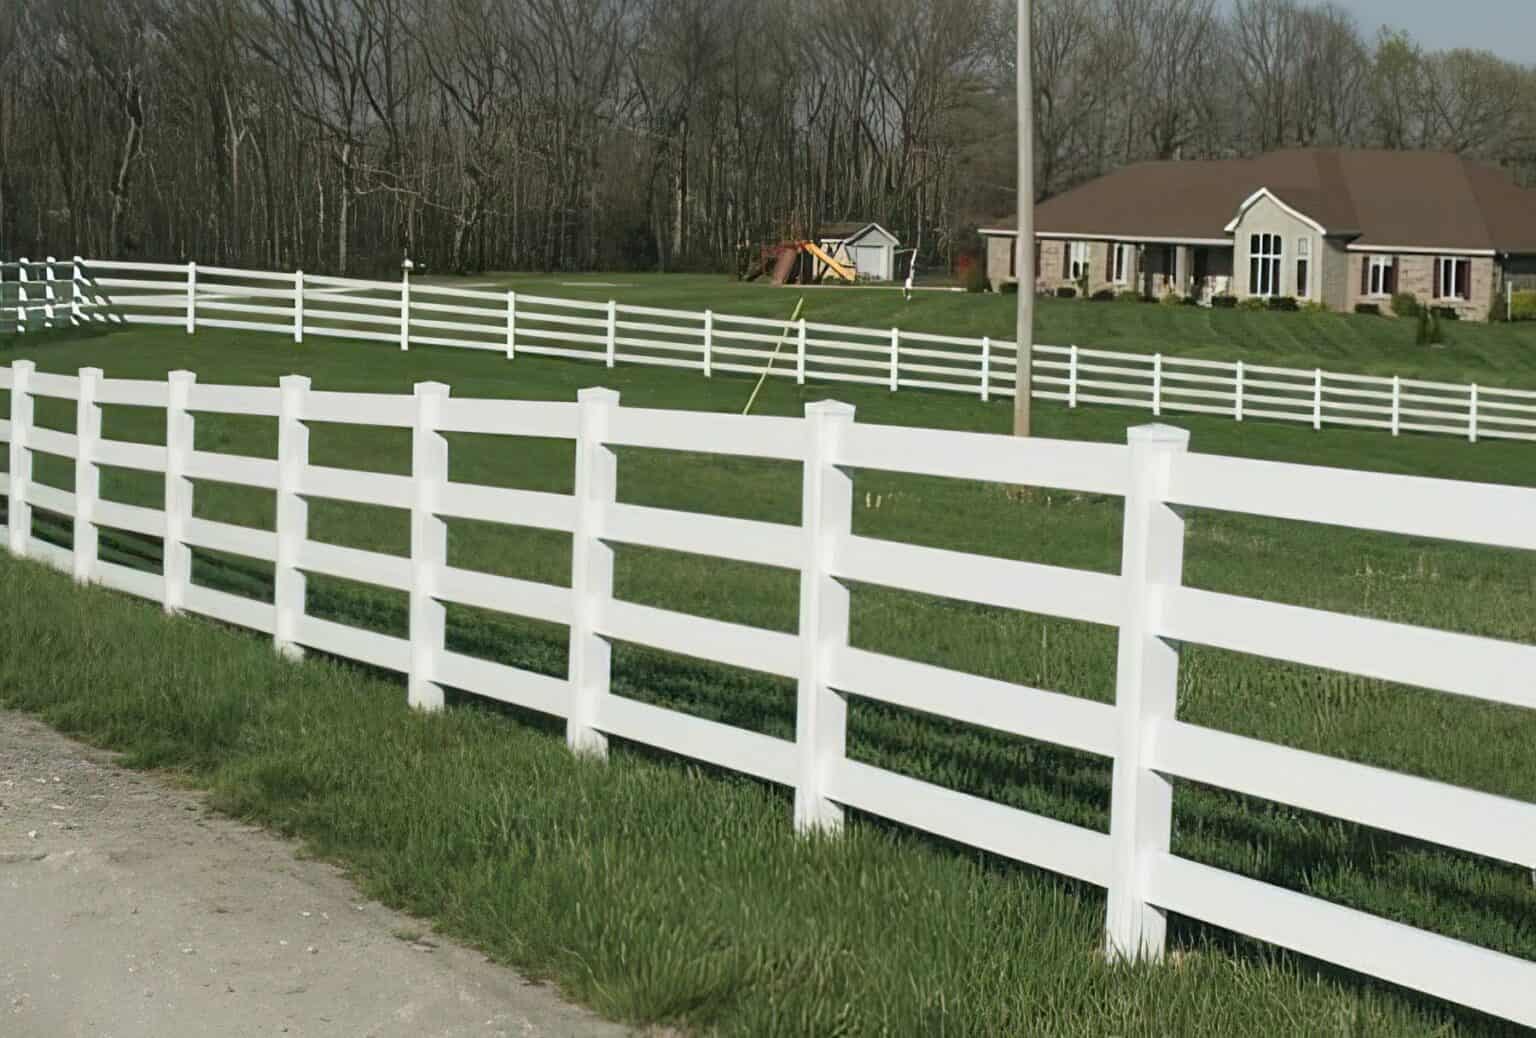 Country home with vinyl 4-rail ranch fence, concrete sidewalk, front lawn, and trees in background, set in a serene open field.